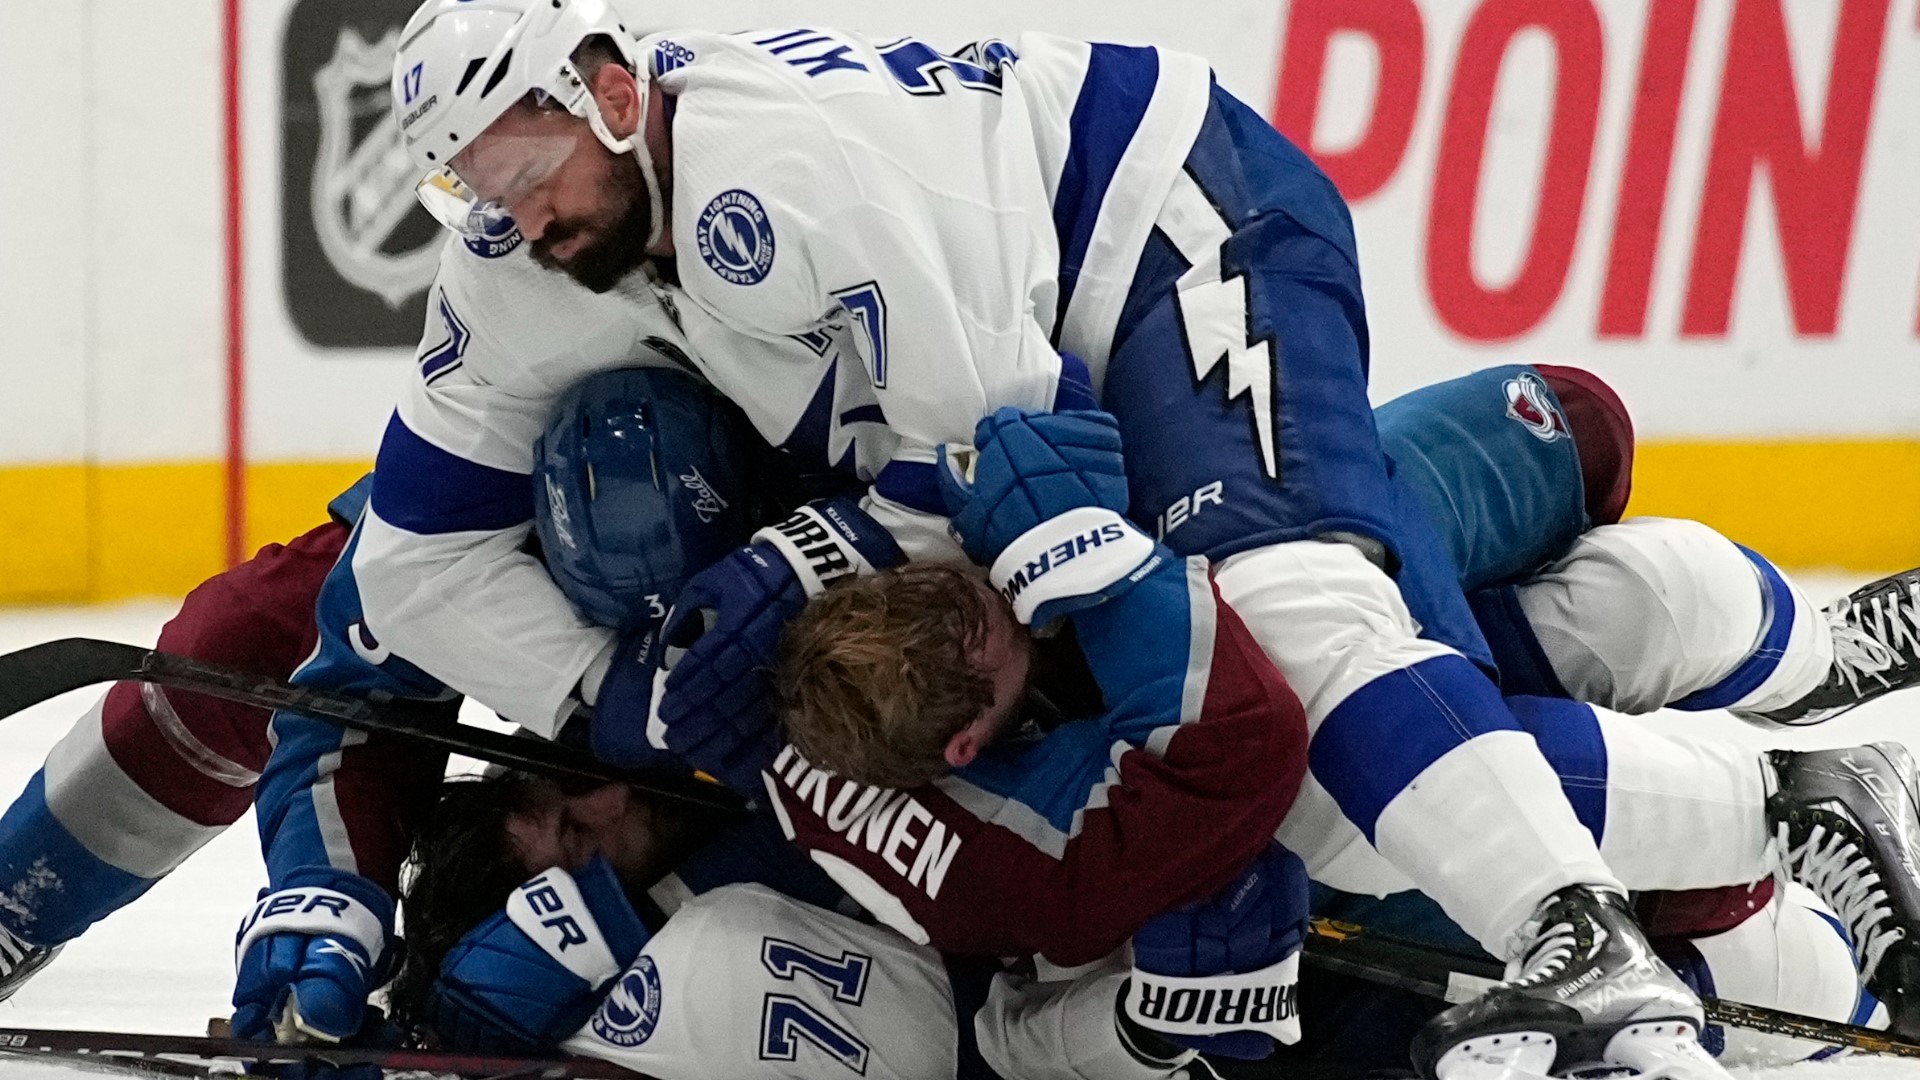 Saturday night's Game 2 grew more hostile than the Stanley Cup Final opener.